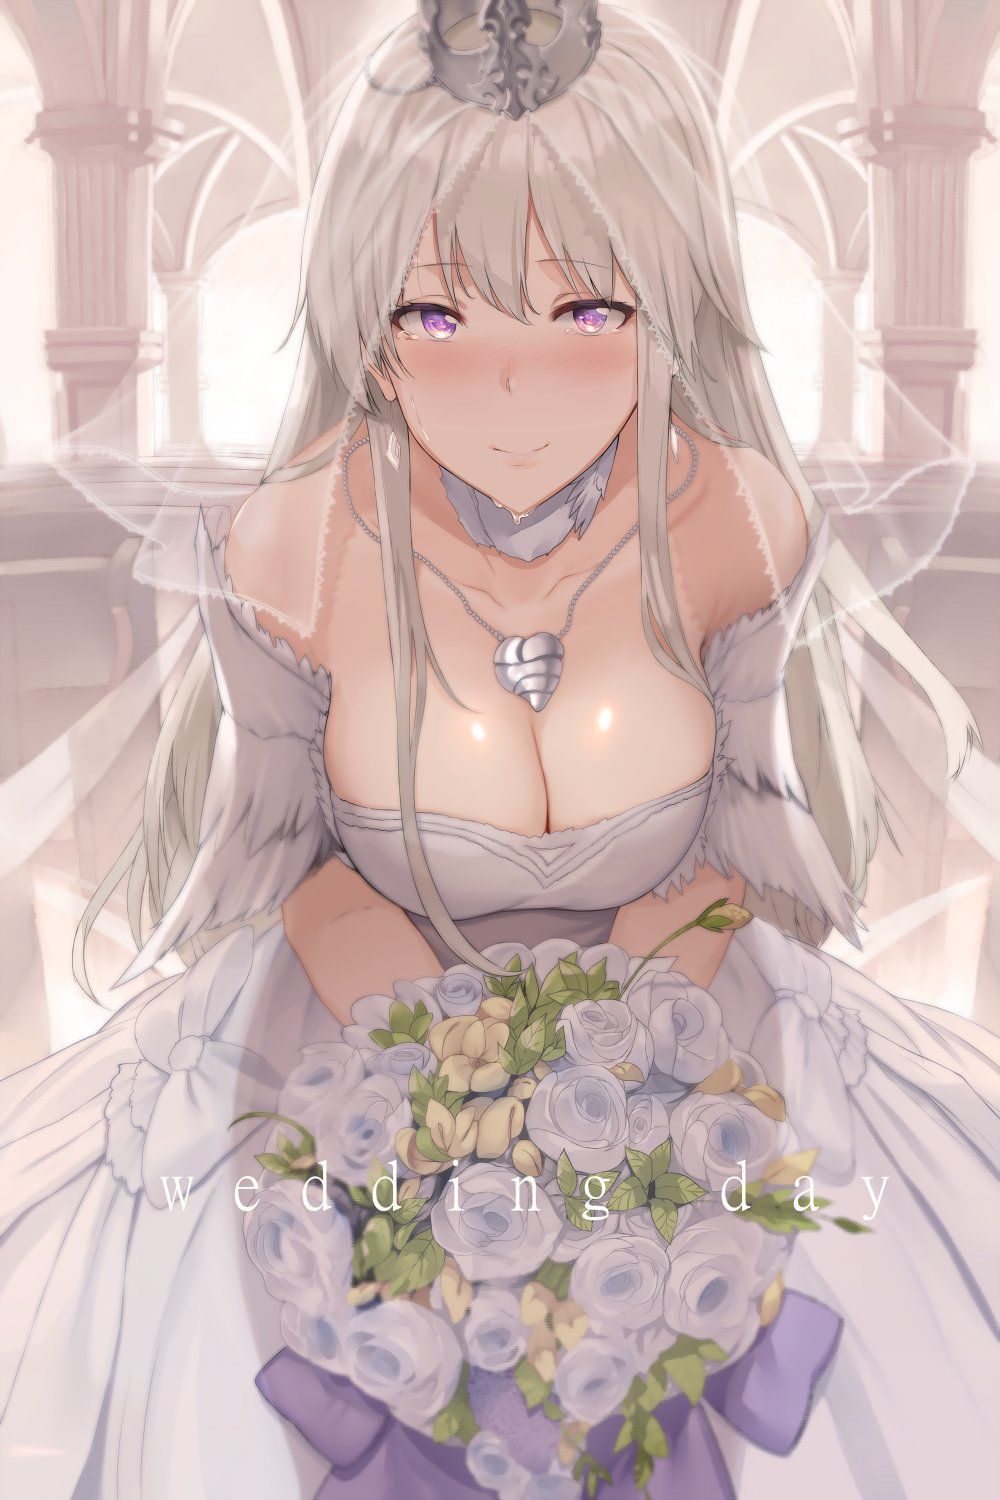 [2nd] Second erotic image of the girl in the wedding dress 15 [wedding dress] 9